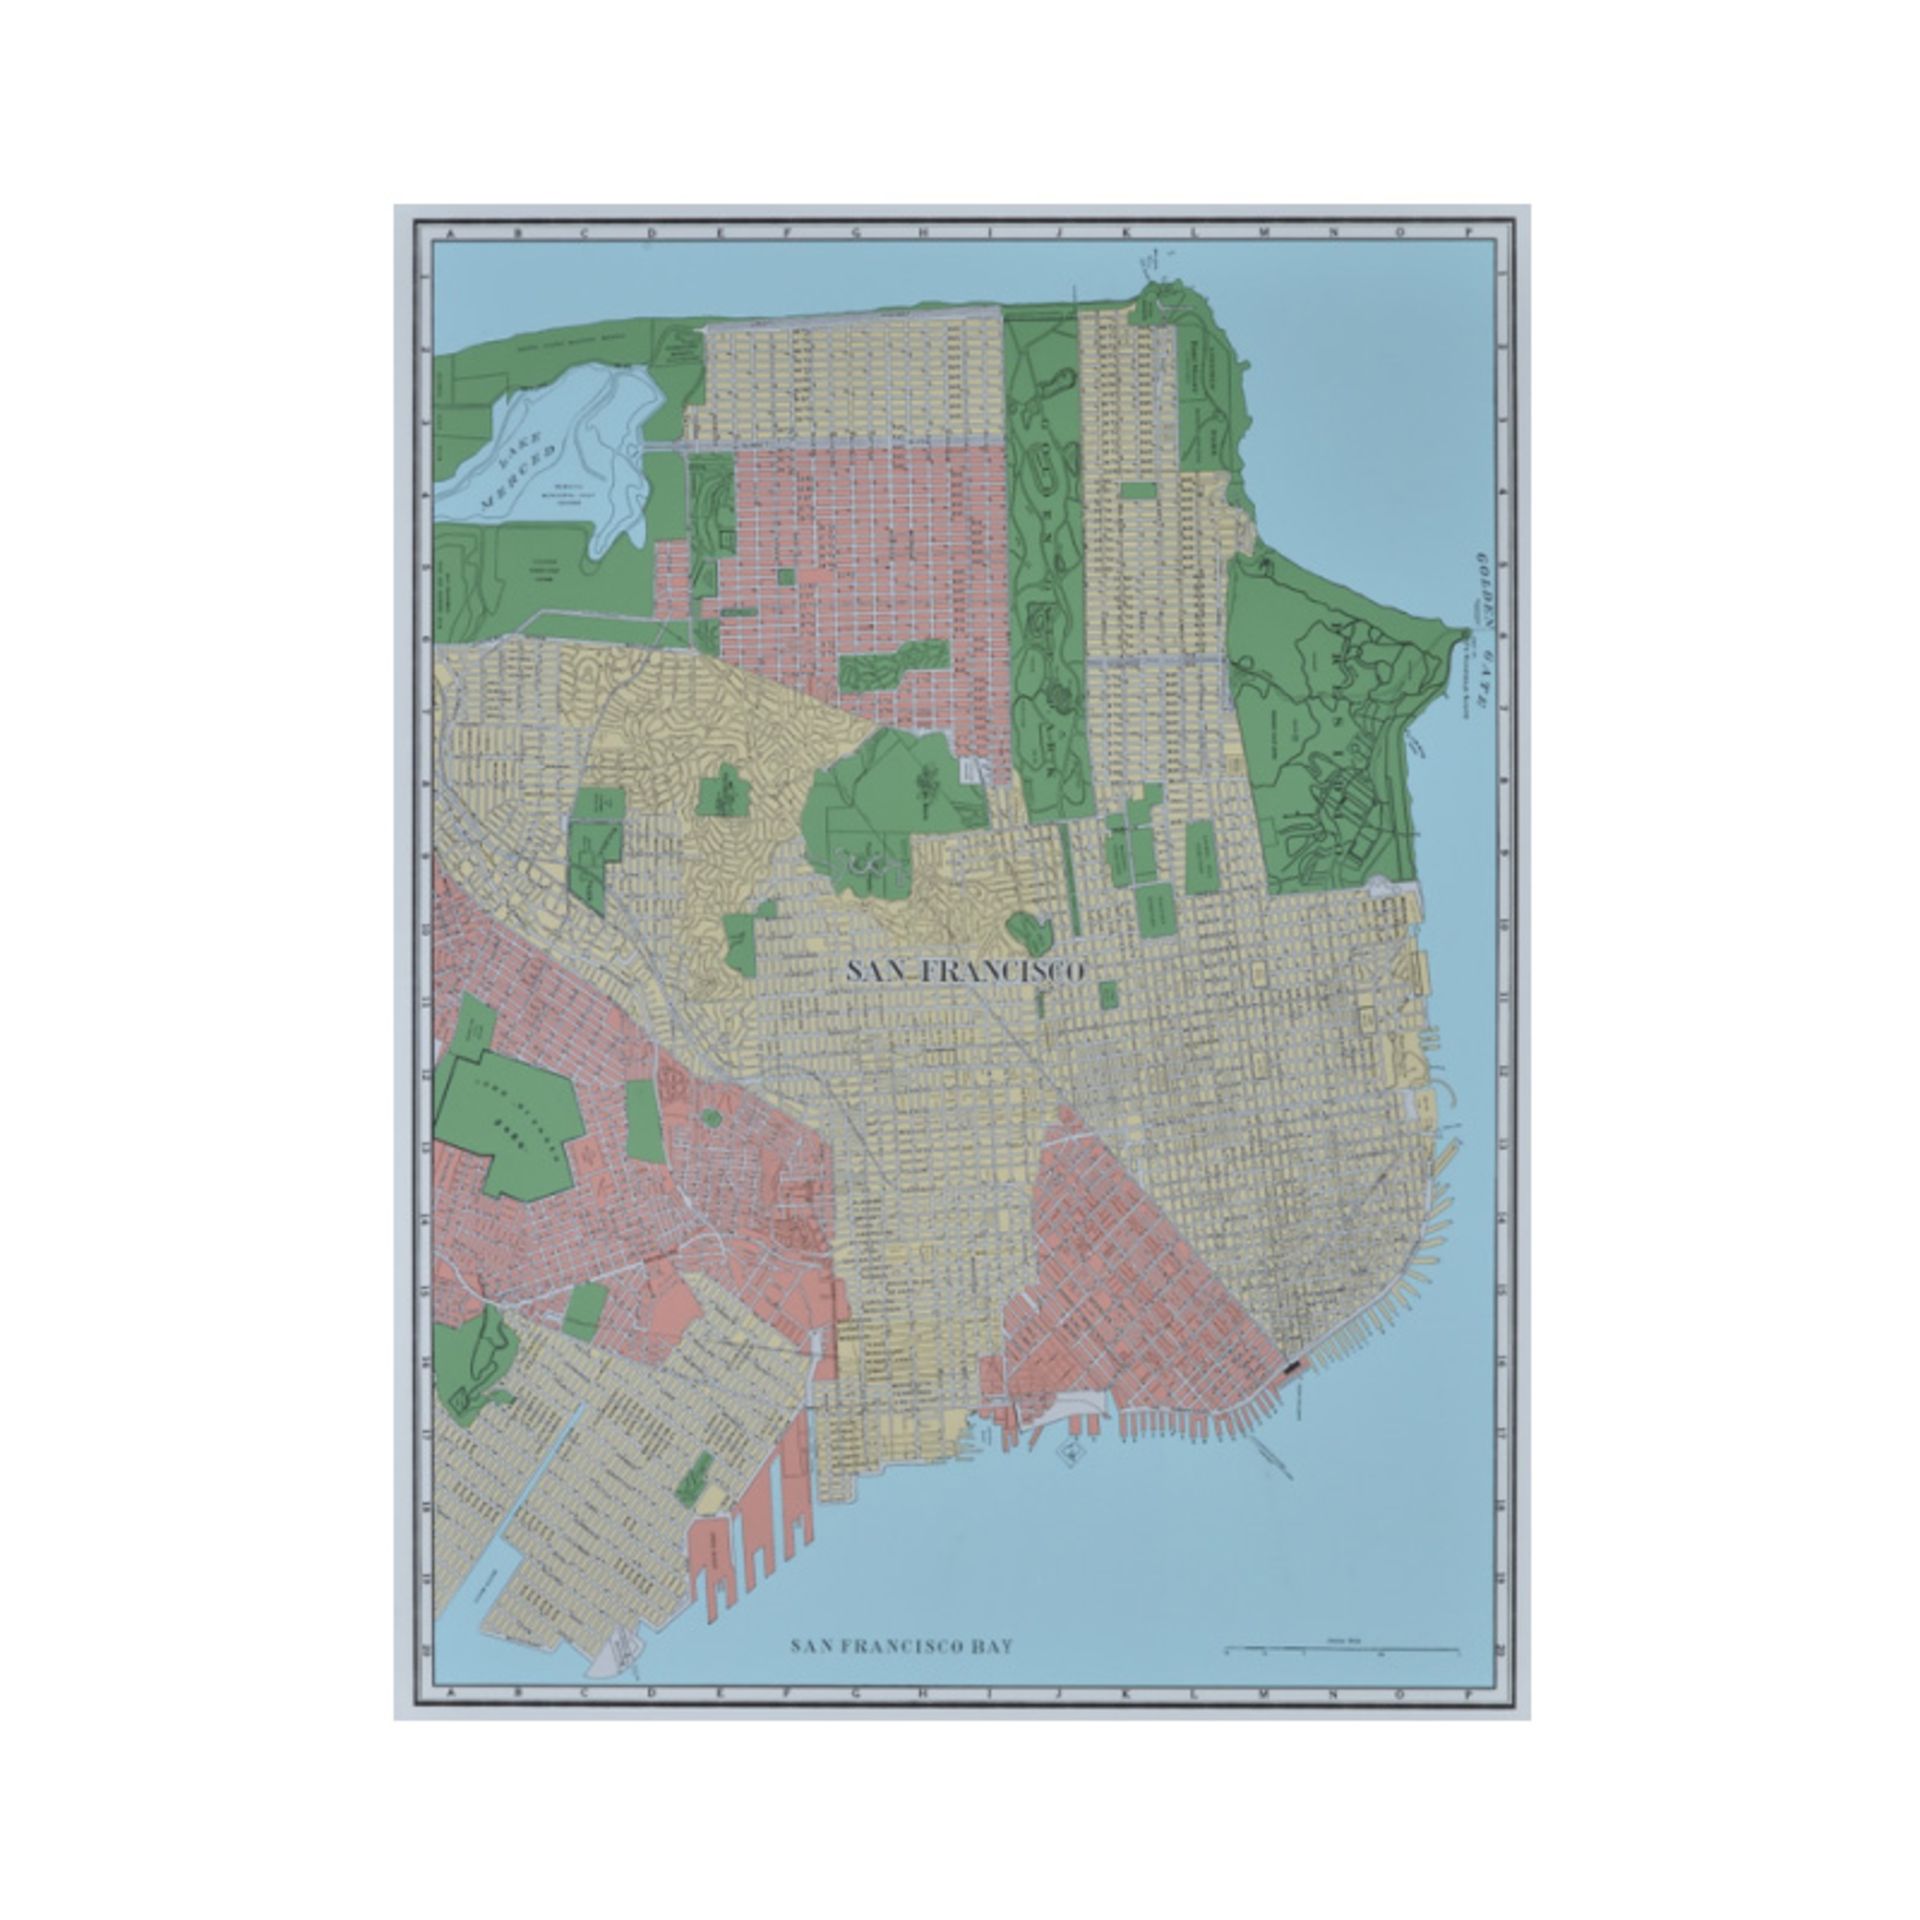 Capital Map San Francisco These Unframed City Maps Pay Homage To Each City's History And The Life